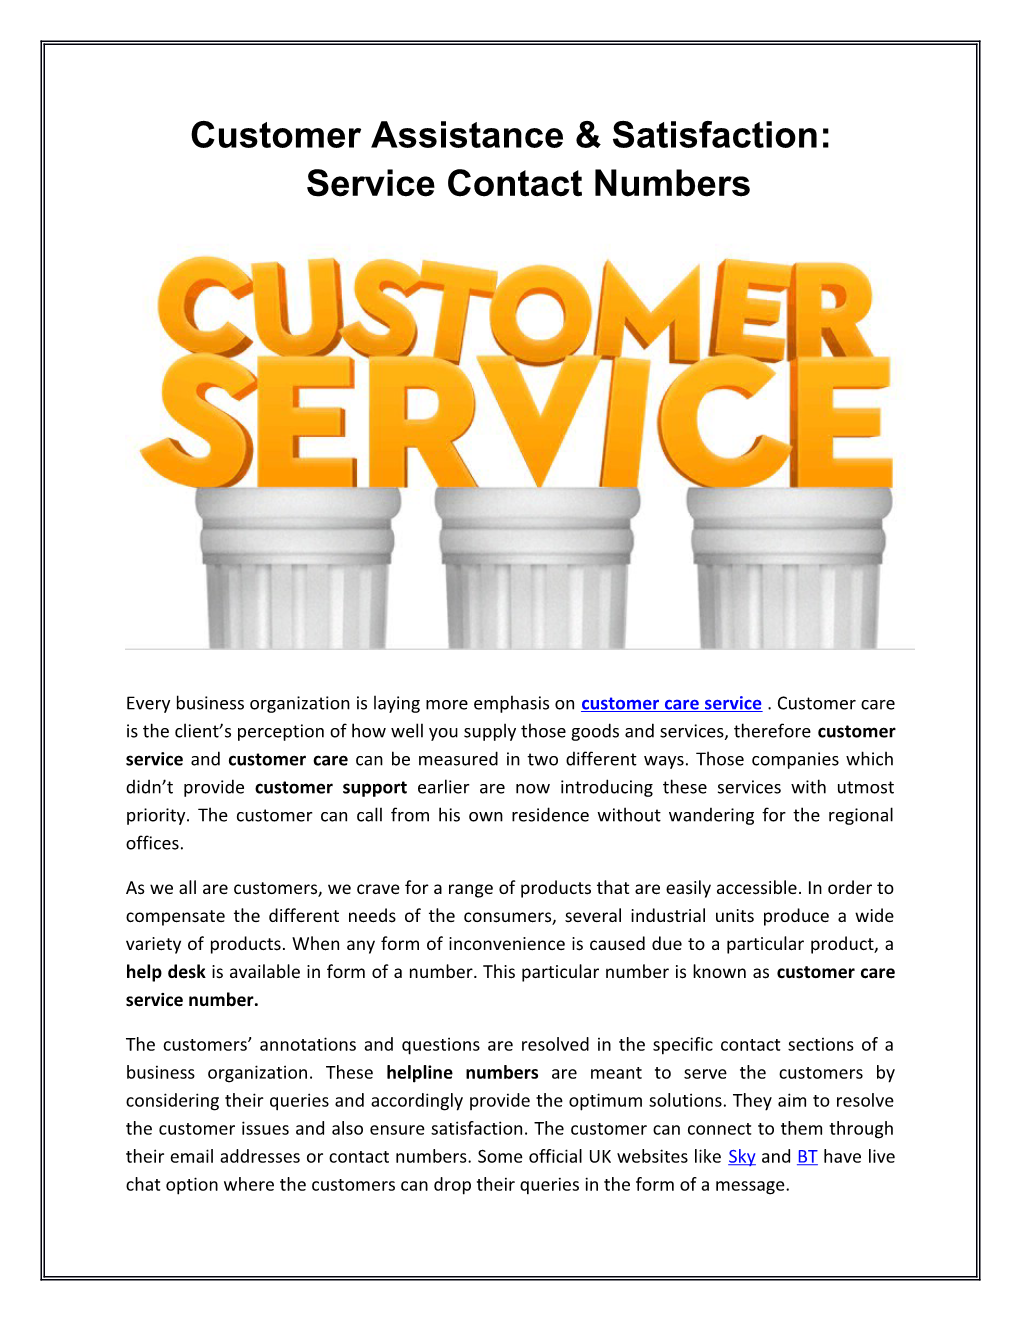 Customer Assistance & Satisfaction: Service Contact Numbers